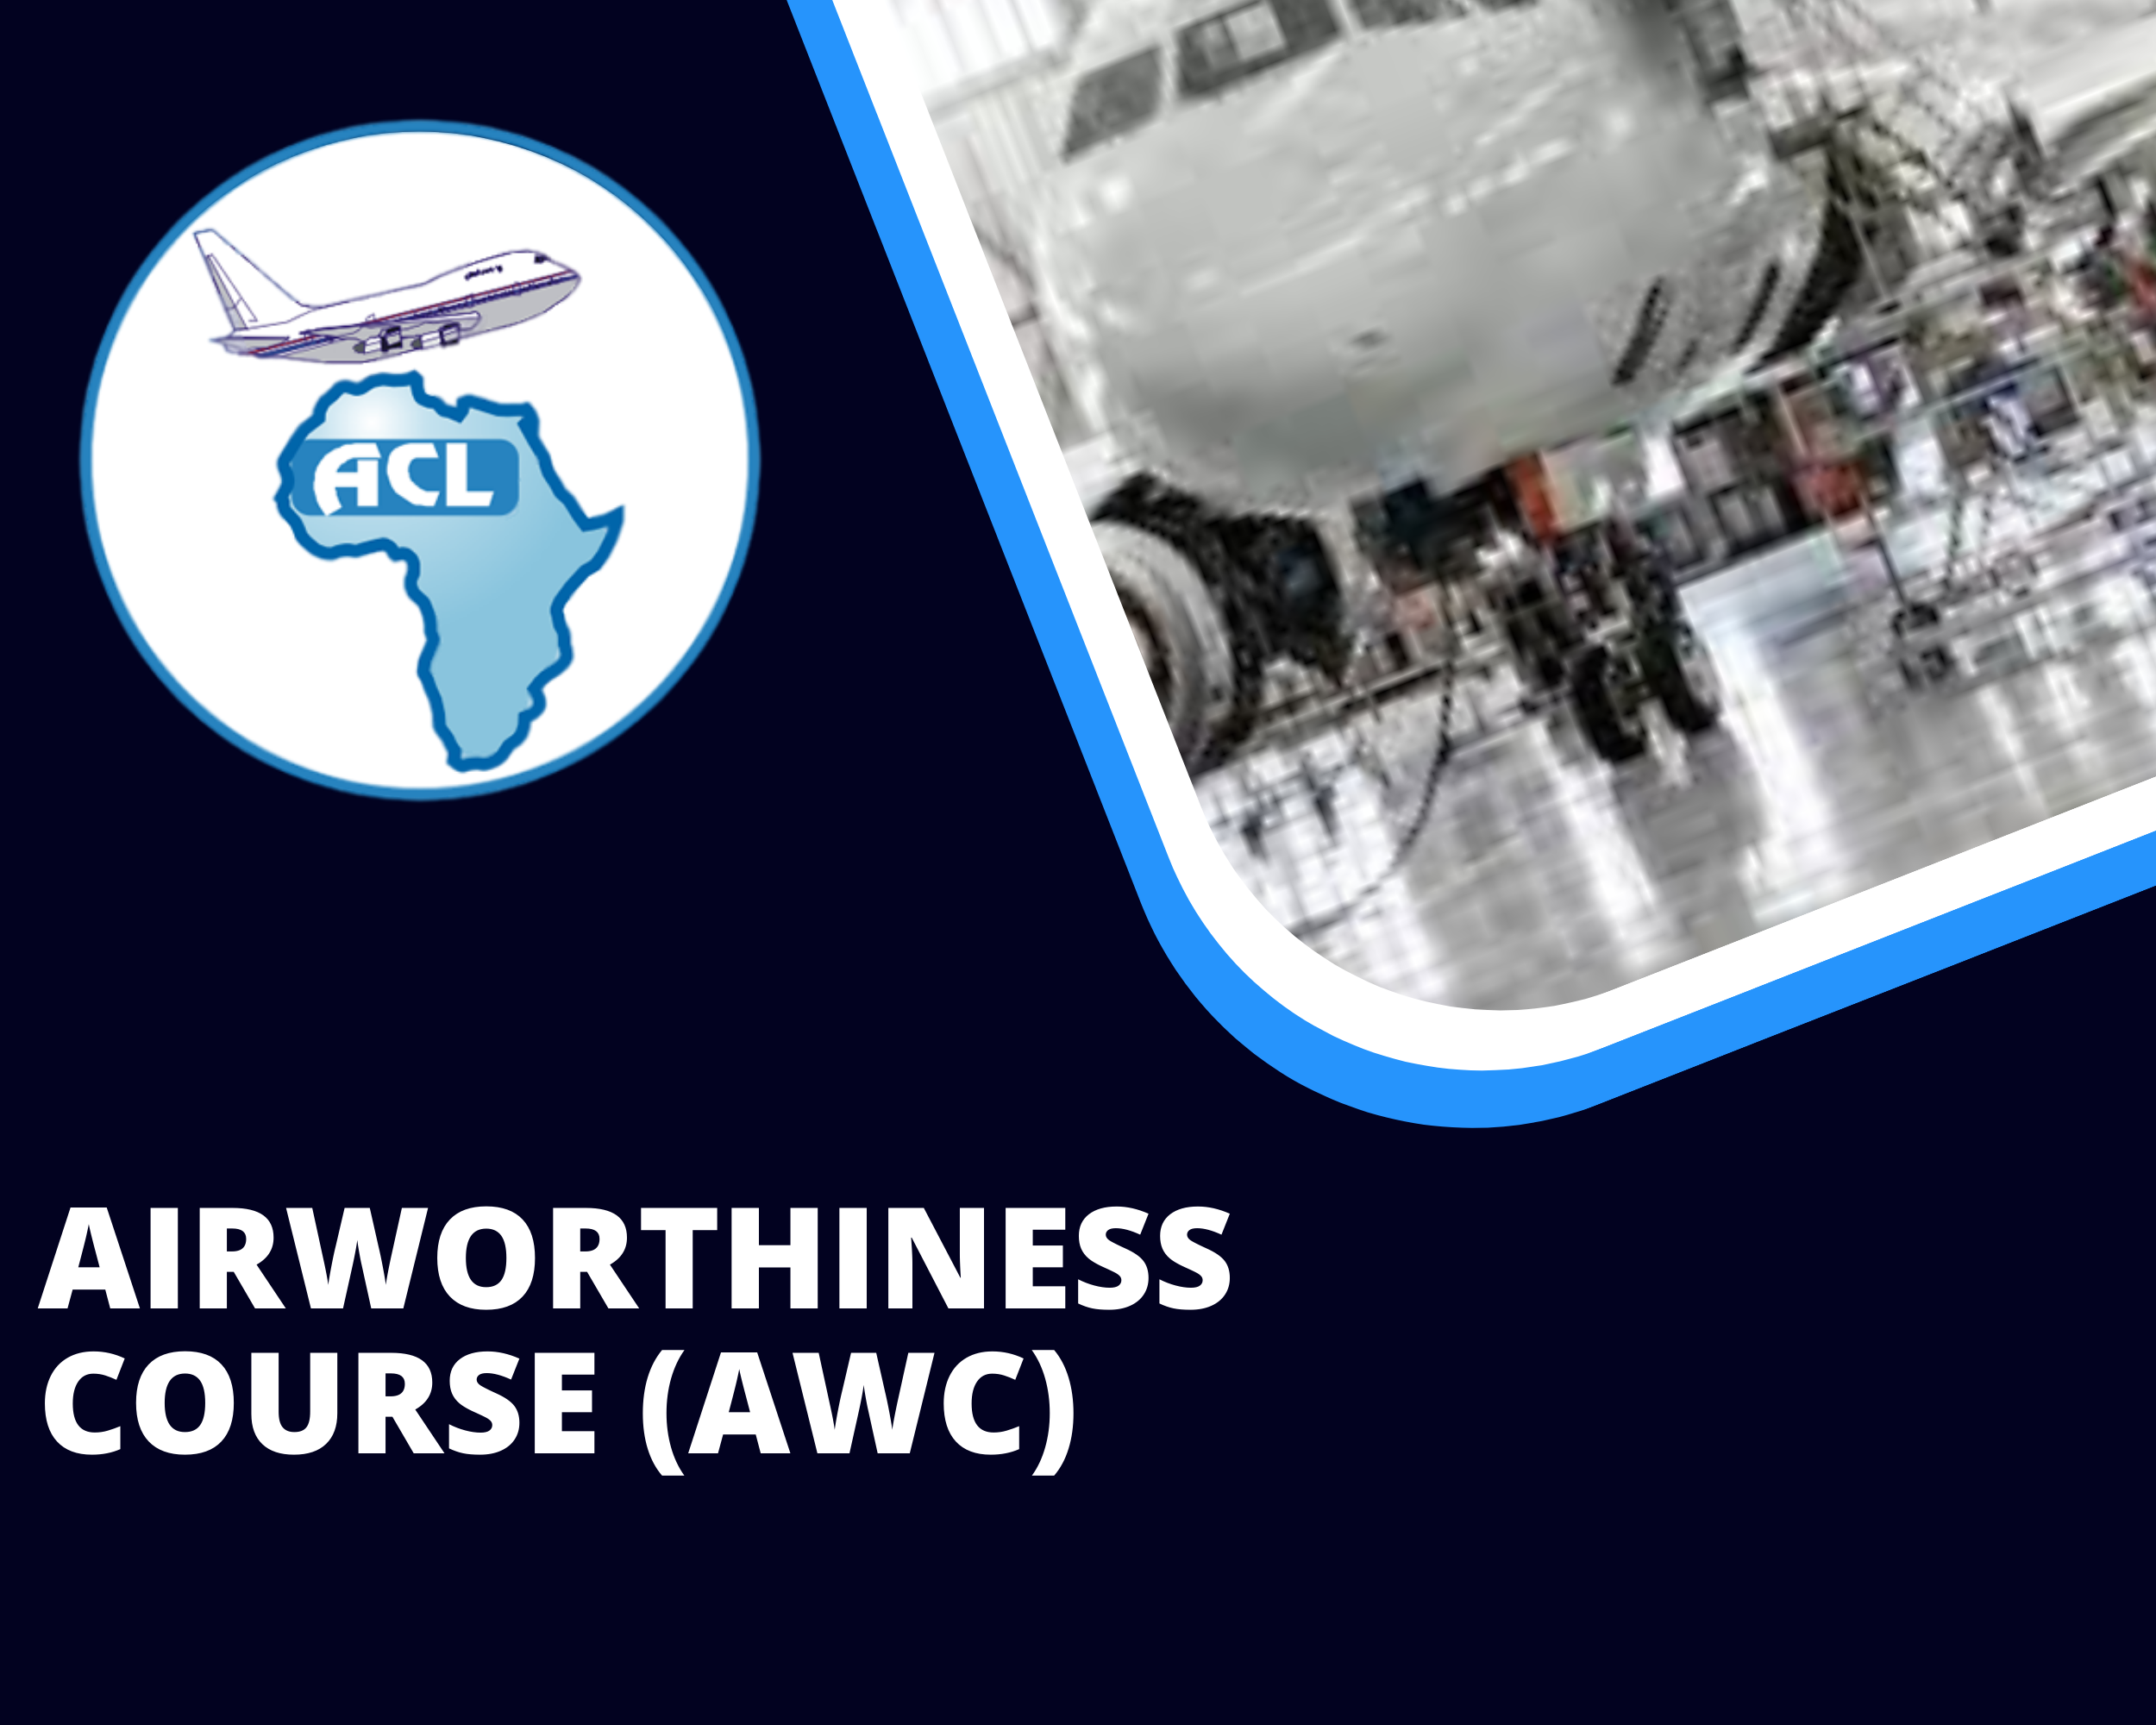 AIRWORTHINESS COURSE (AWC)